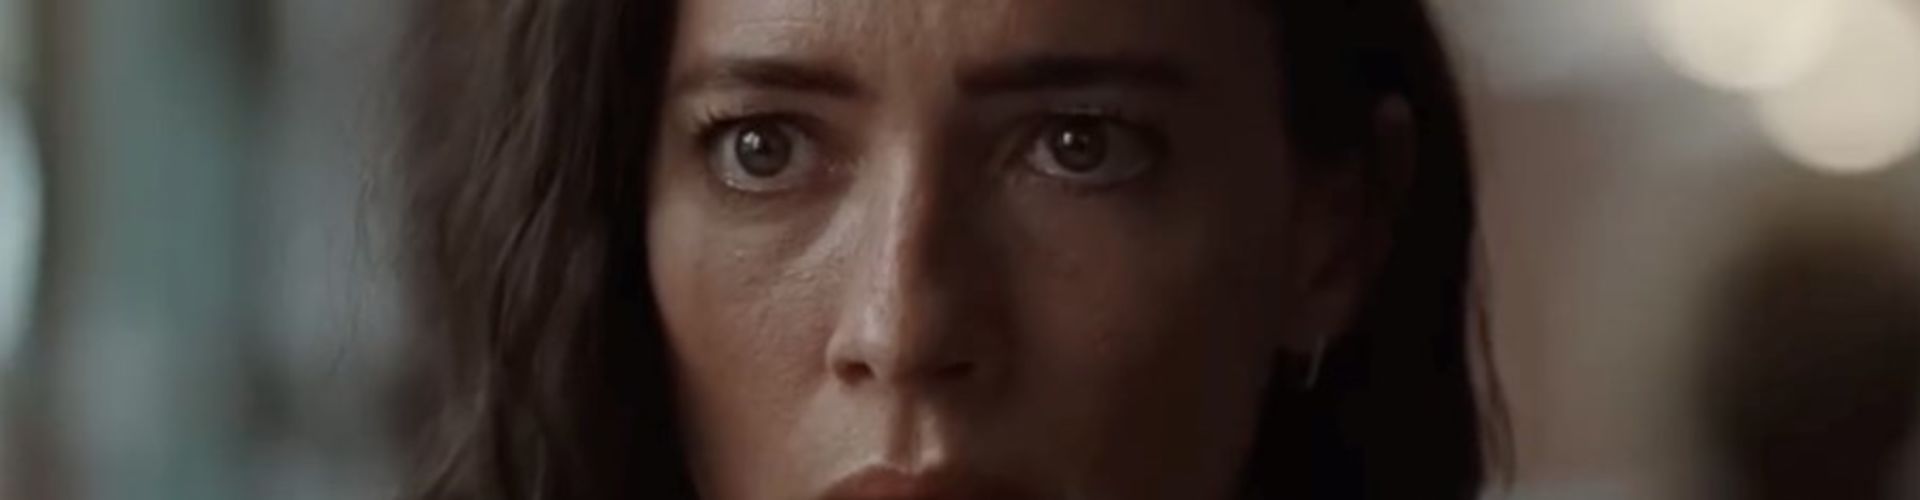 Resurrection Trailer Is Out, Starring Rebecca Hall